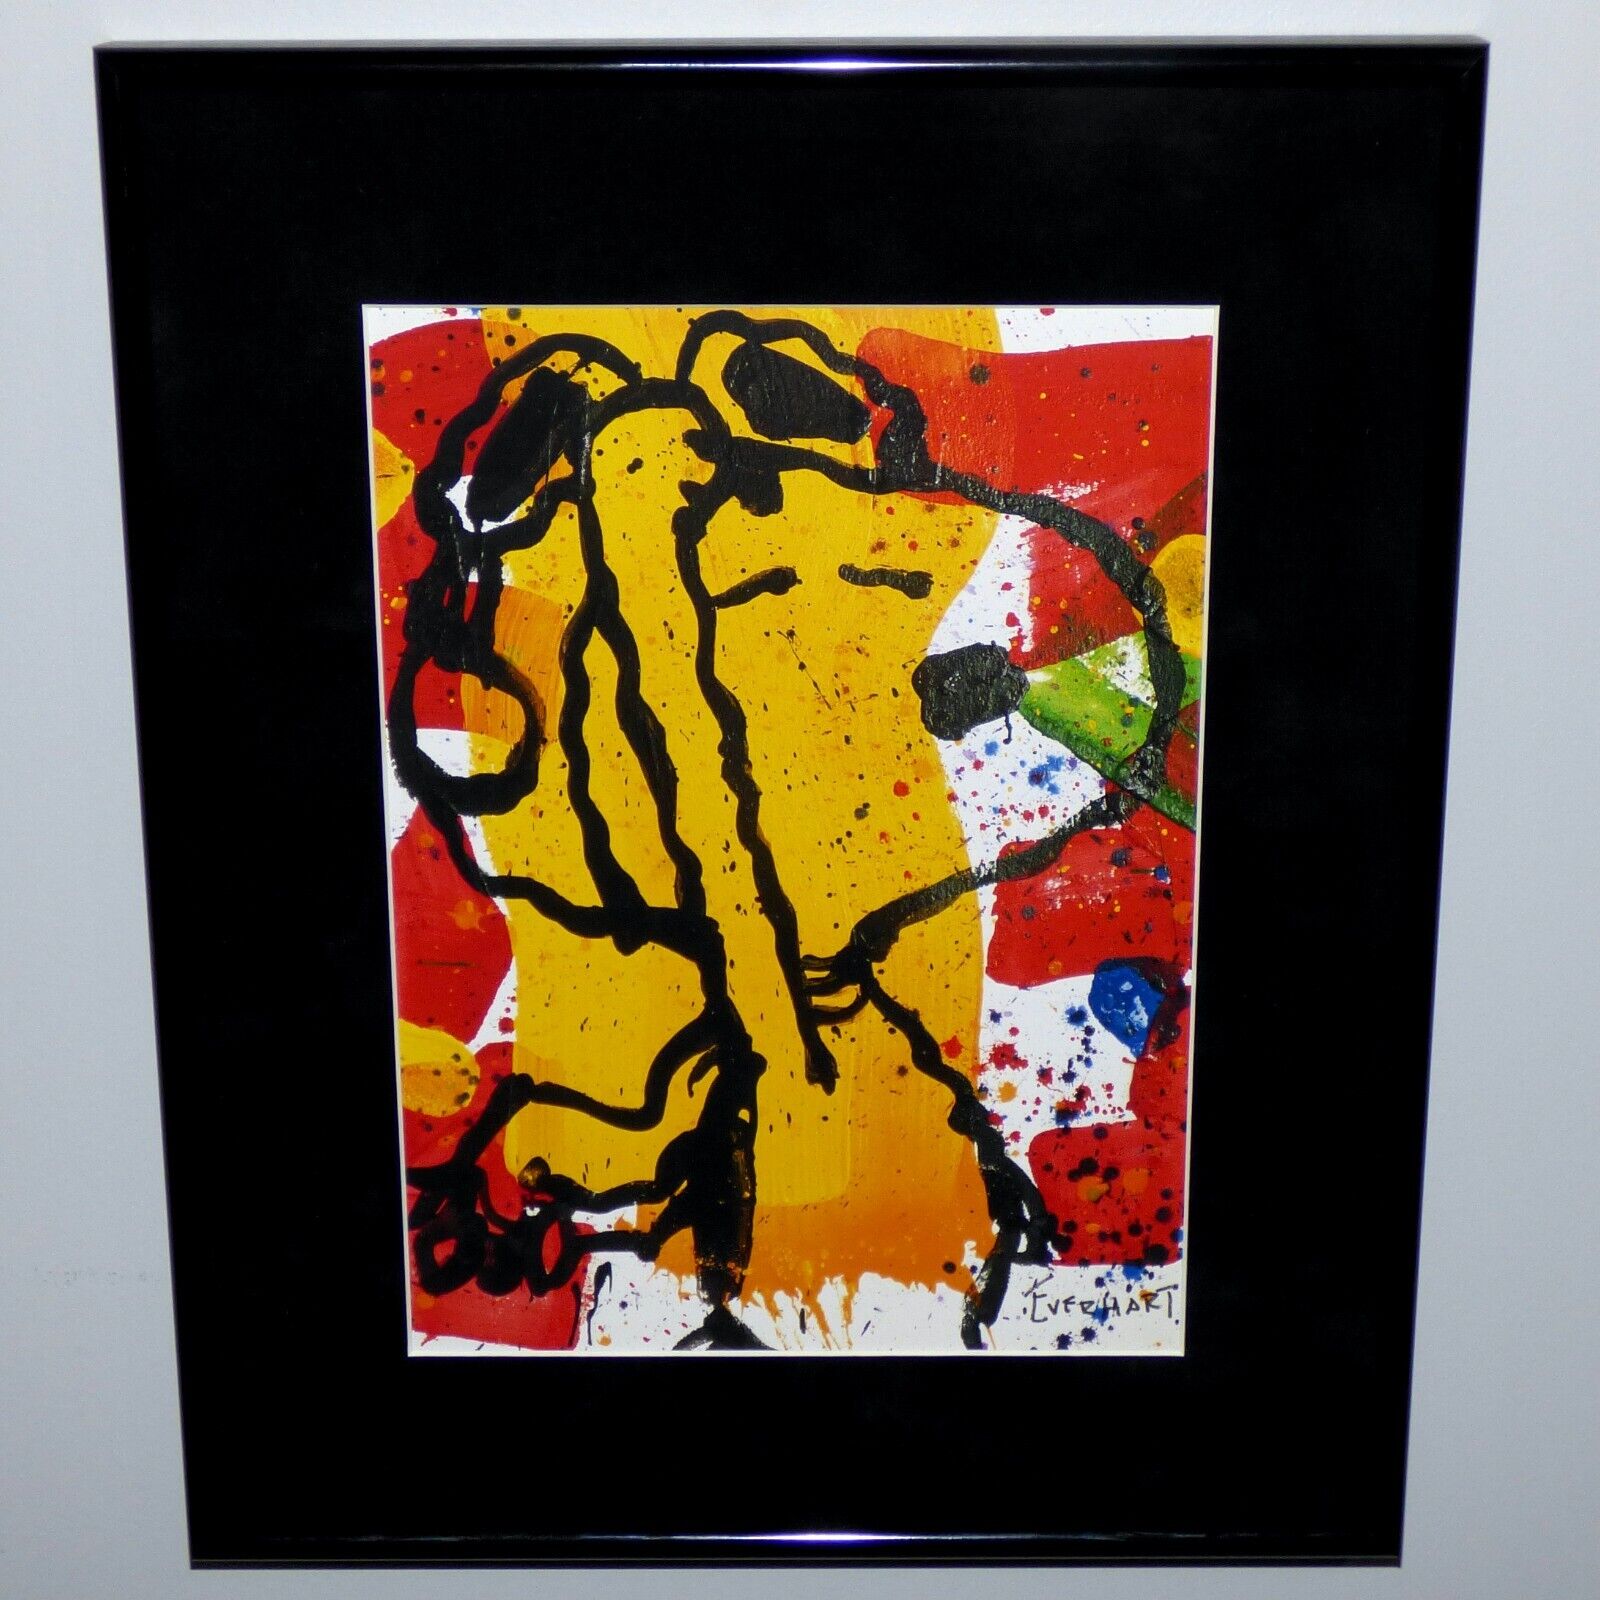 PEANUTS BY TOM EVERHART SNOOPY WWI FLYING ACE FRAMED PRINT CHARLES SCHULZ